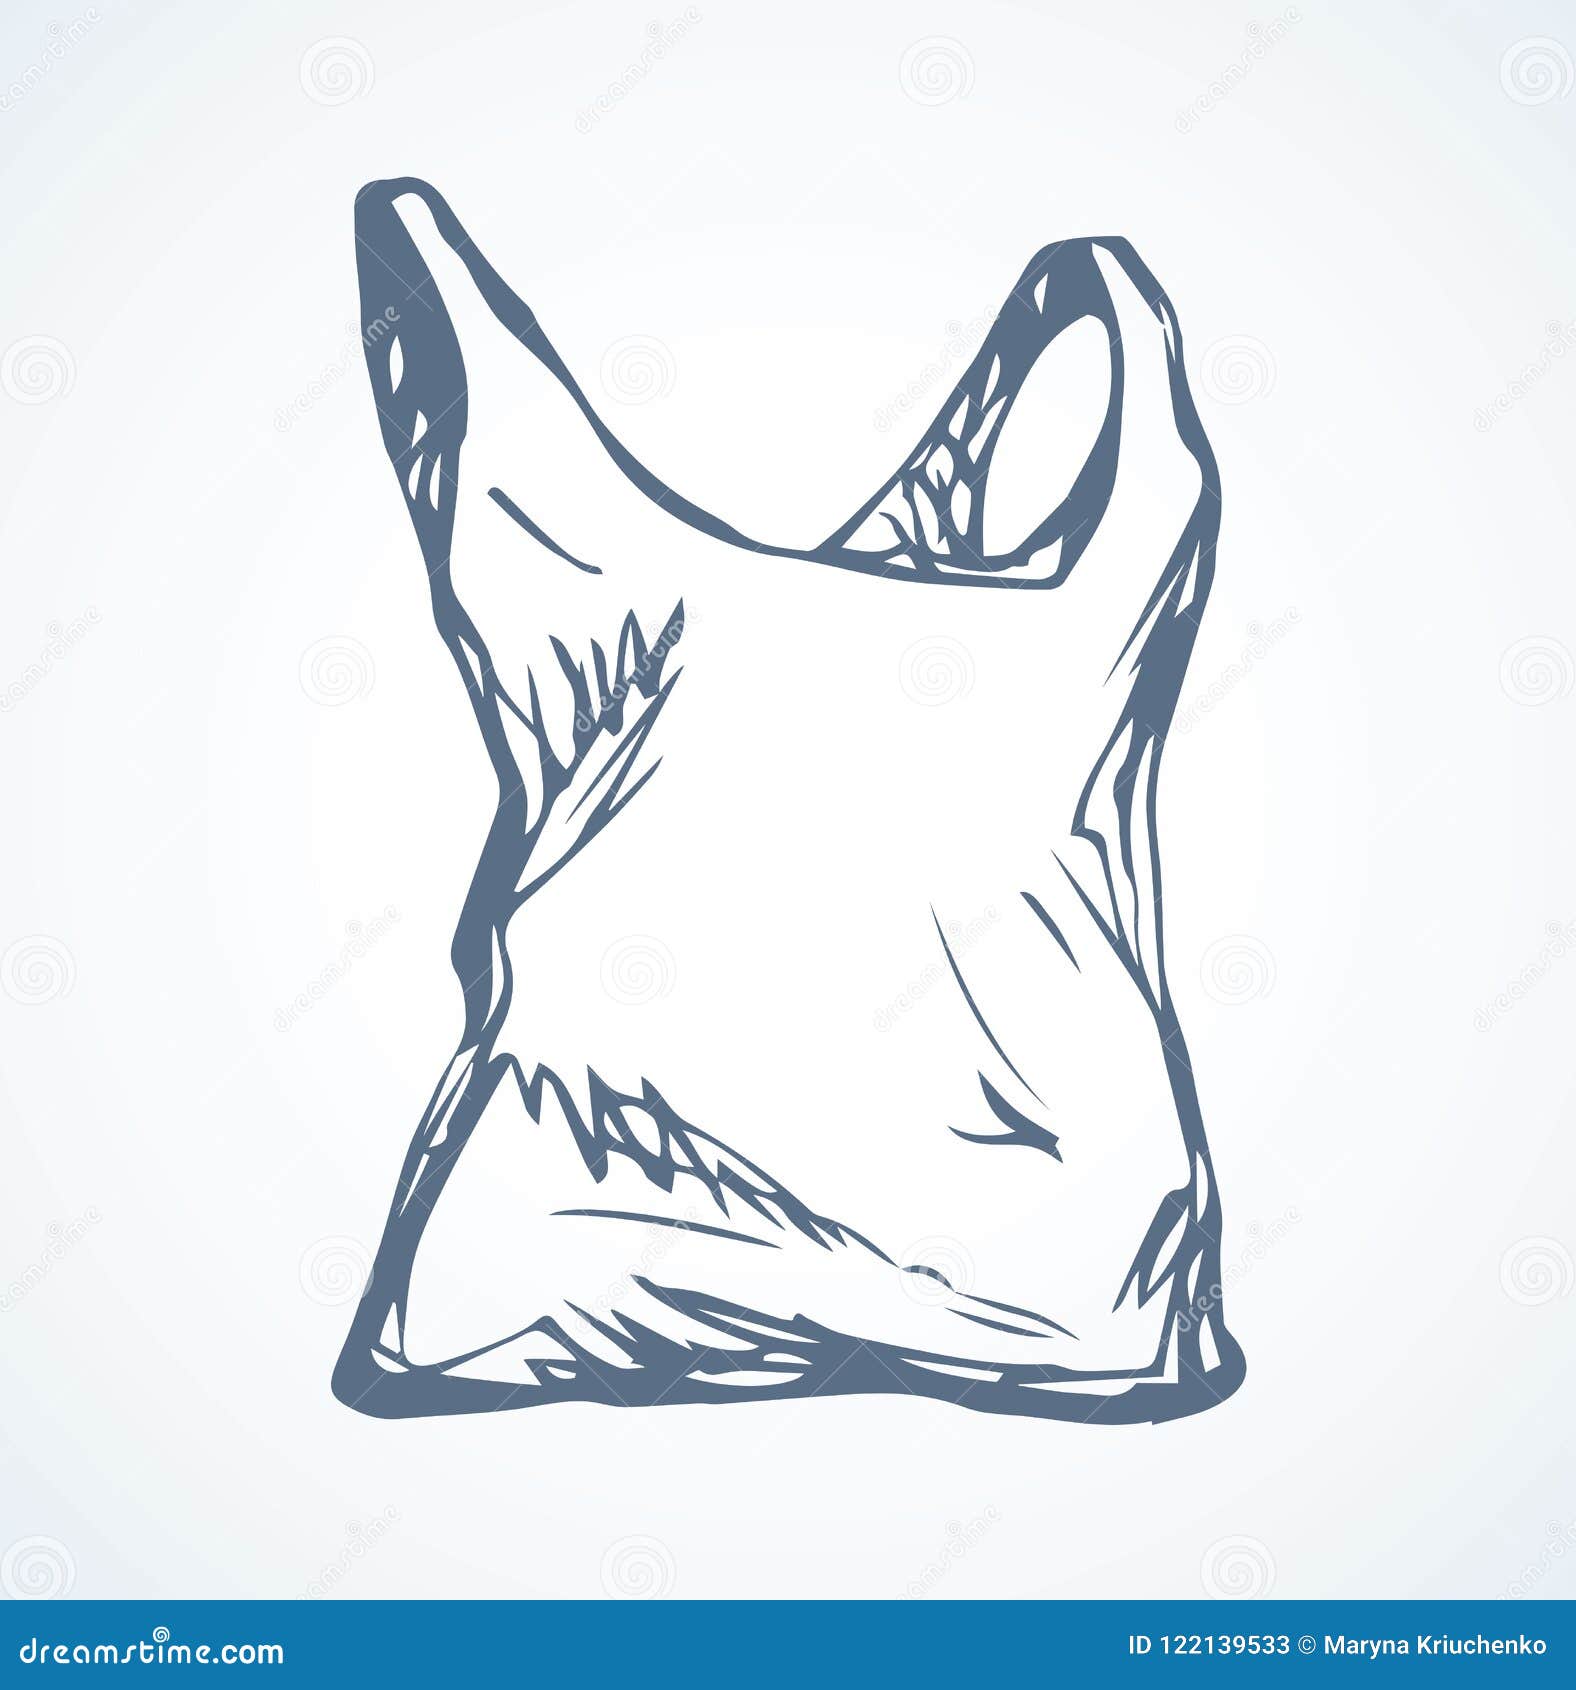 How to draw a plastic bag step by step easy - YouTube